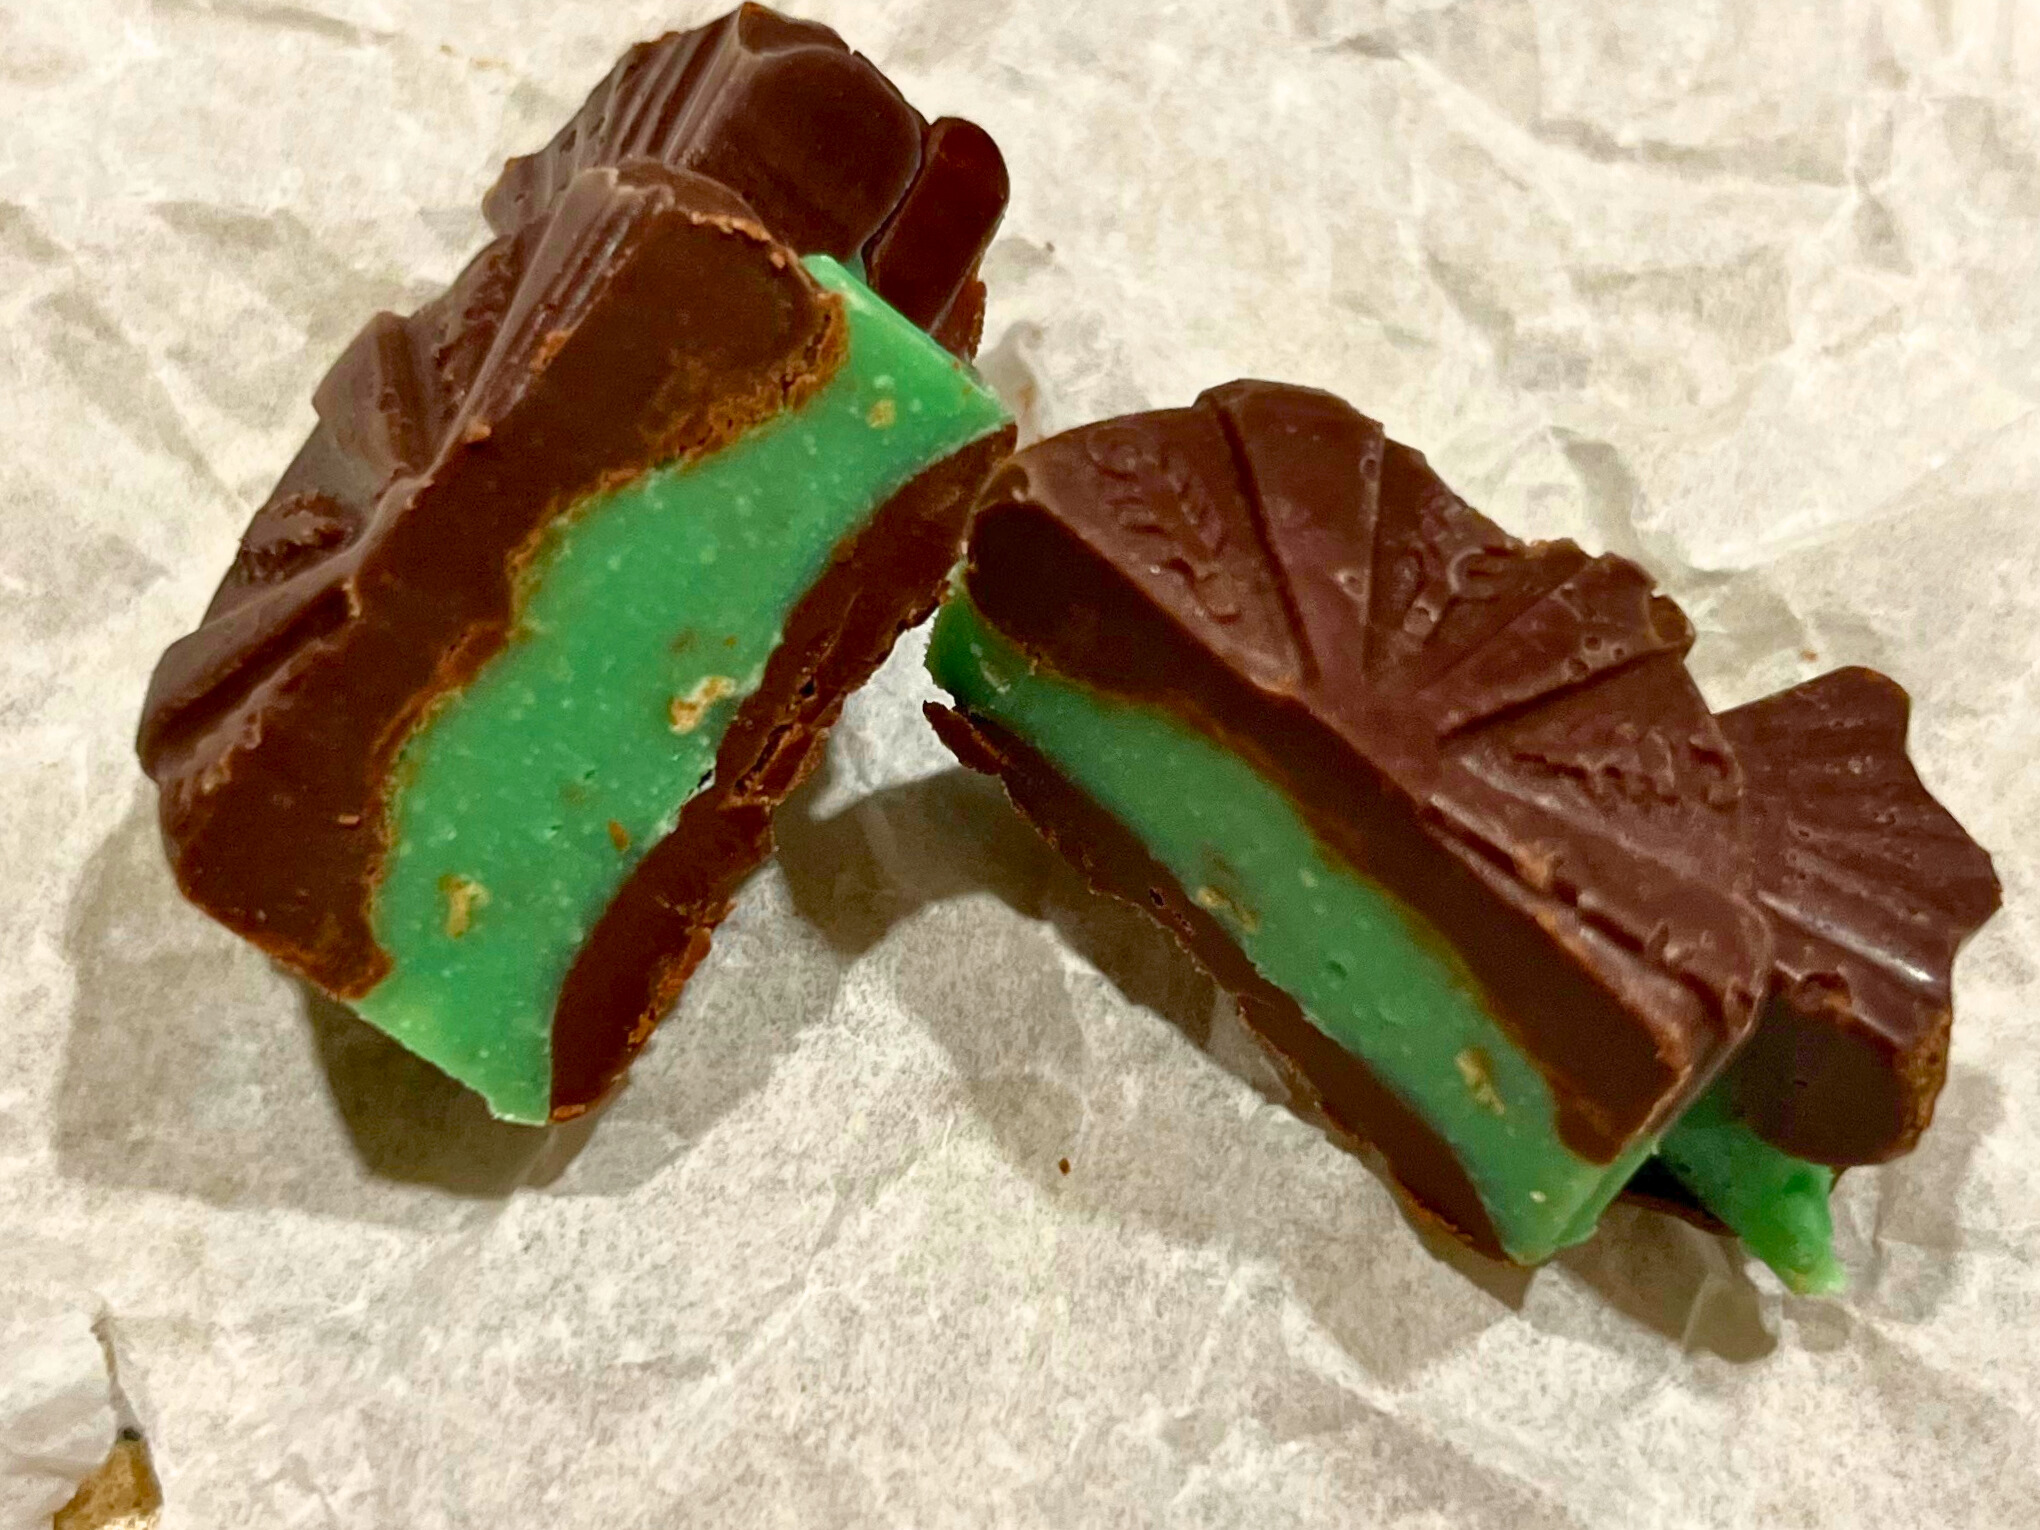 A chocolate mint candy cut in half on a piece of parchment paper.